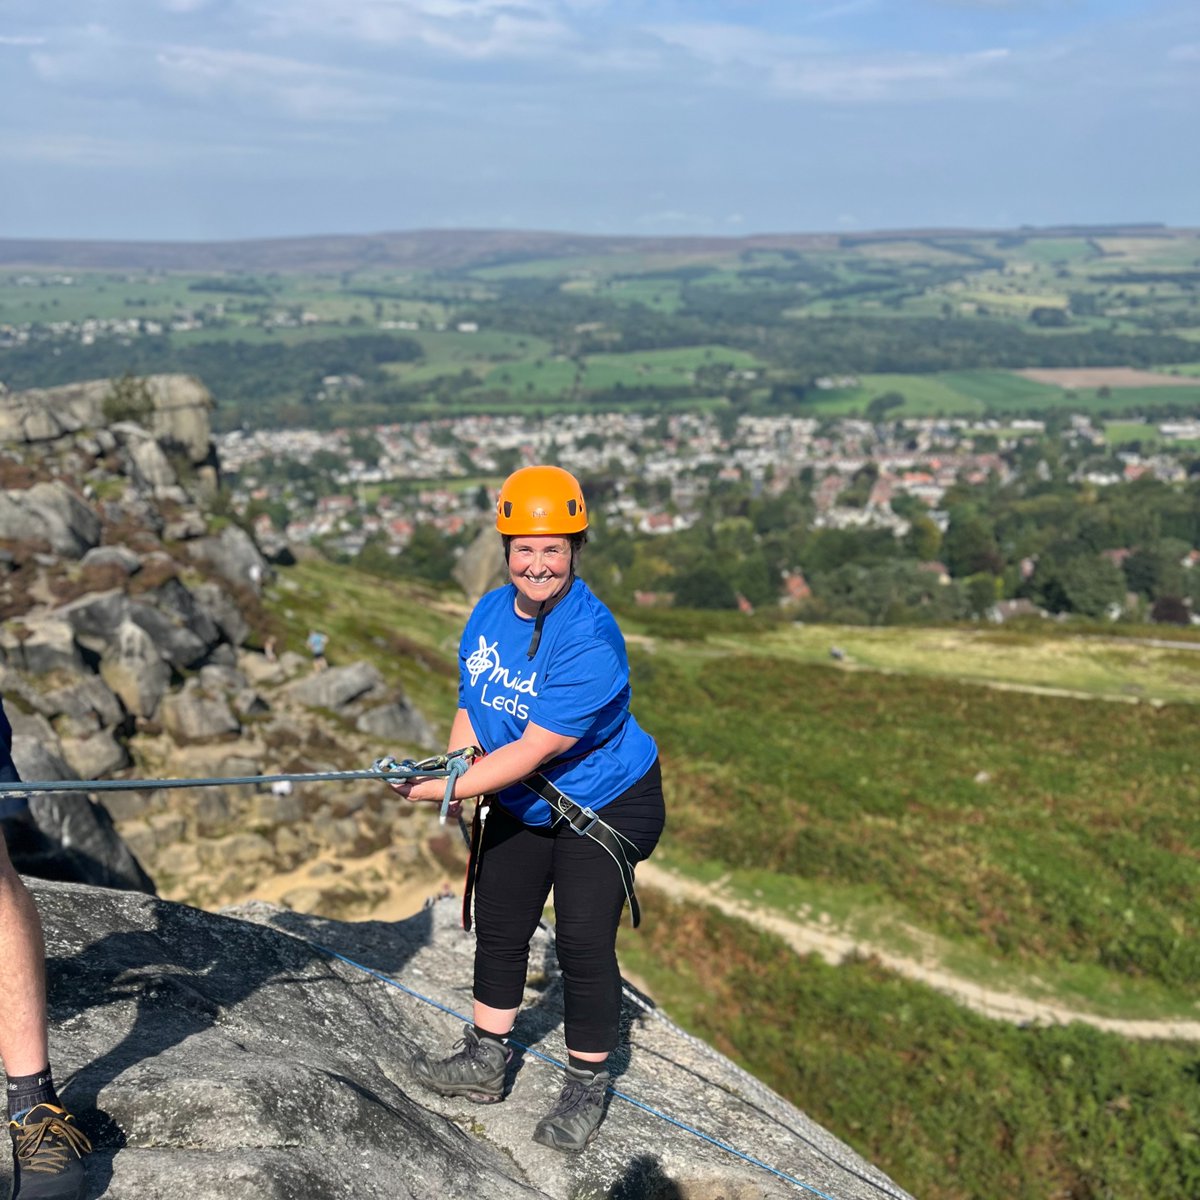 Be empowered to brave the heights of the Cow and Calf in Ilkley this year at The Great Yorkshire Abseil on Saturday 14th September, to help raise money for local mental health services! Visit our website today to get your place 🧗‍♀️ lght.ly/786c9lk